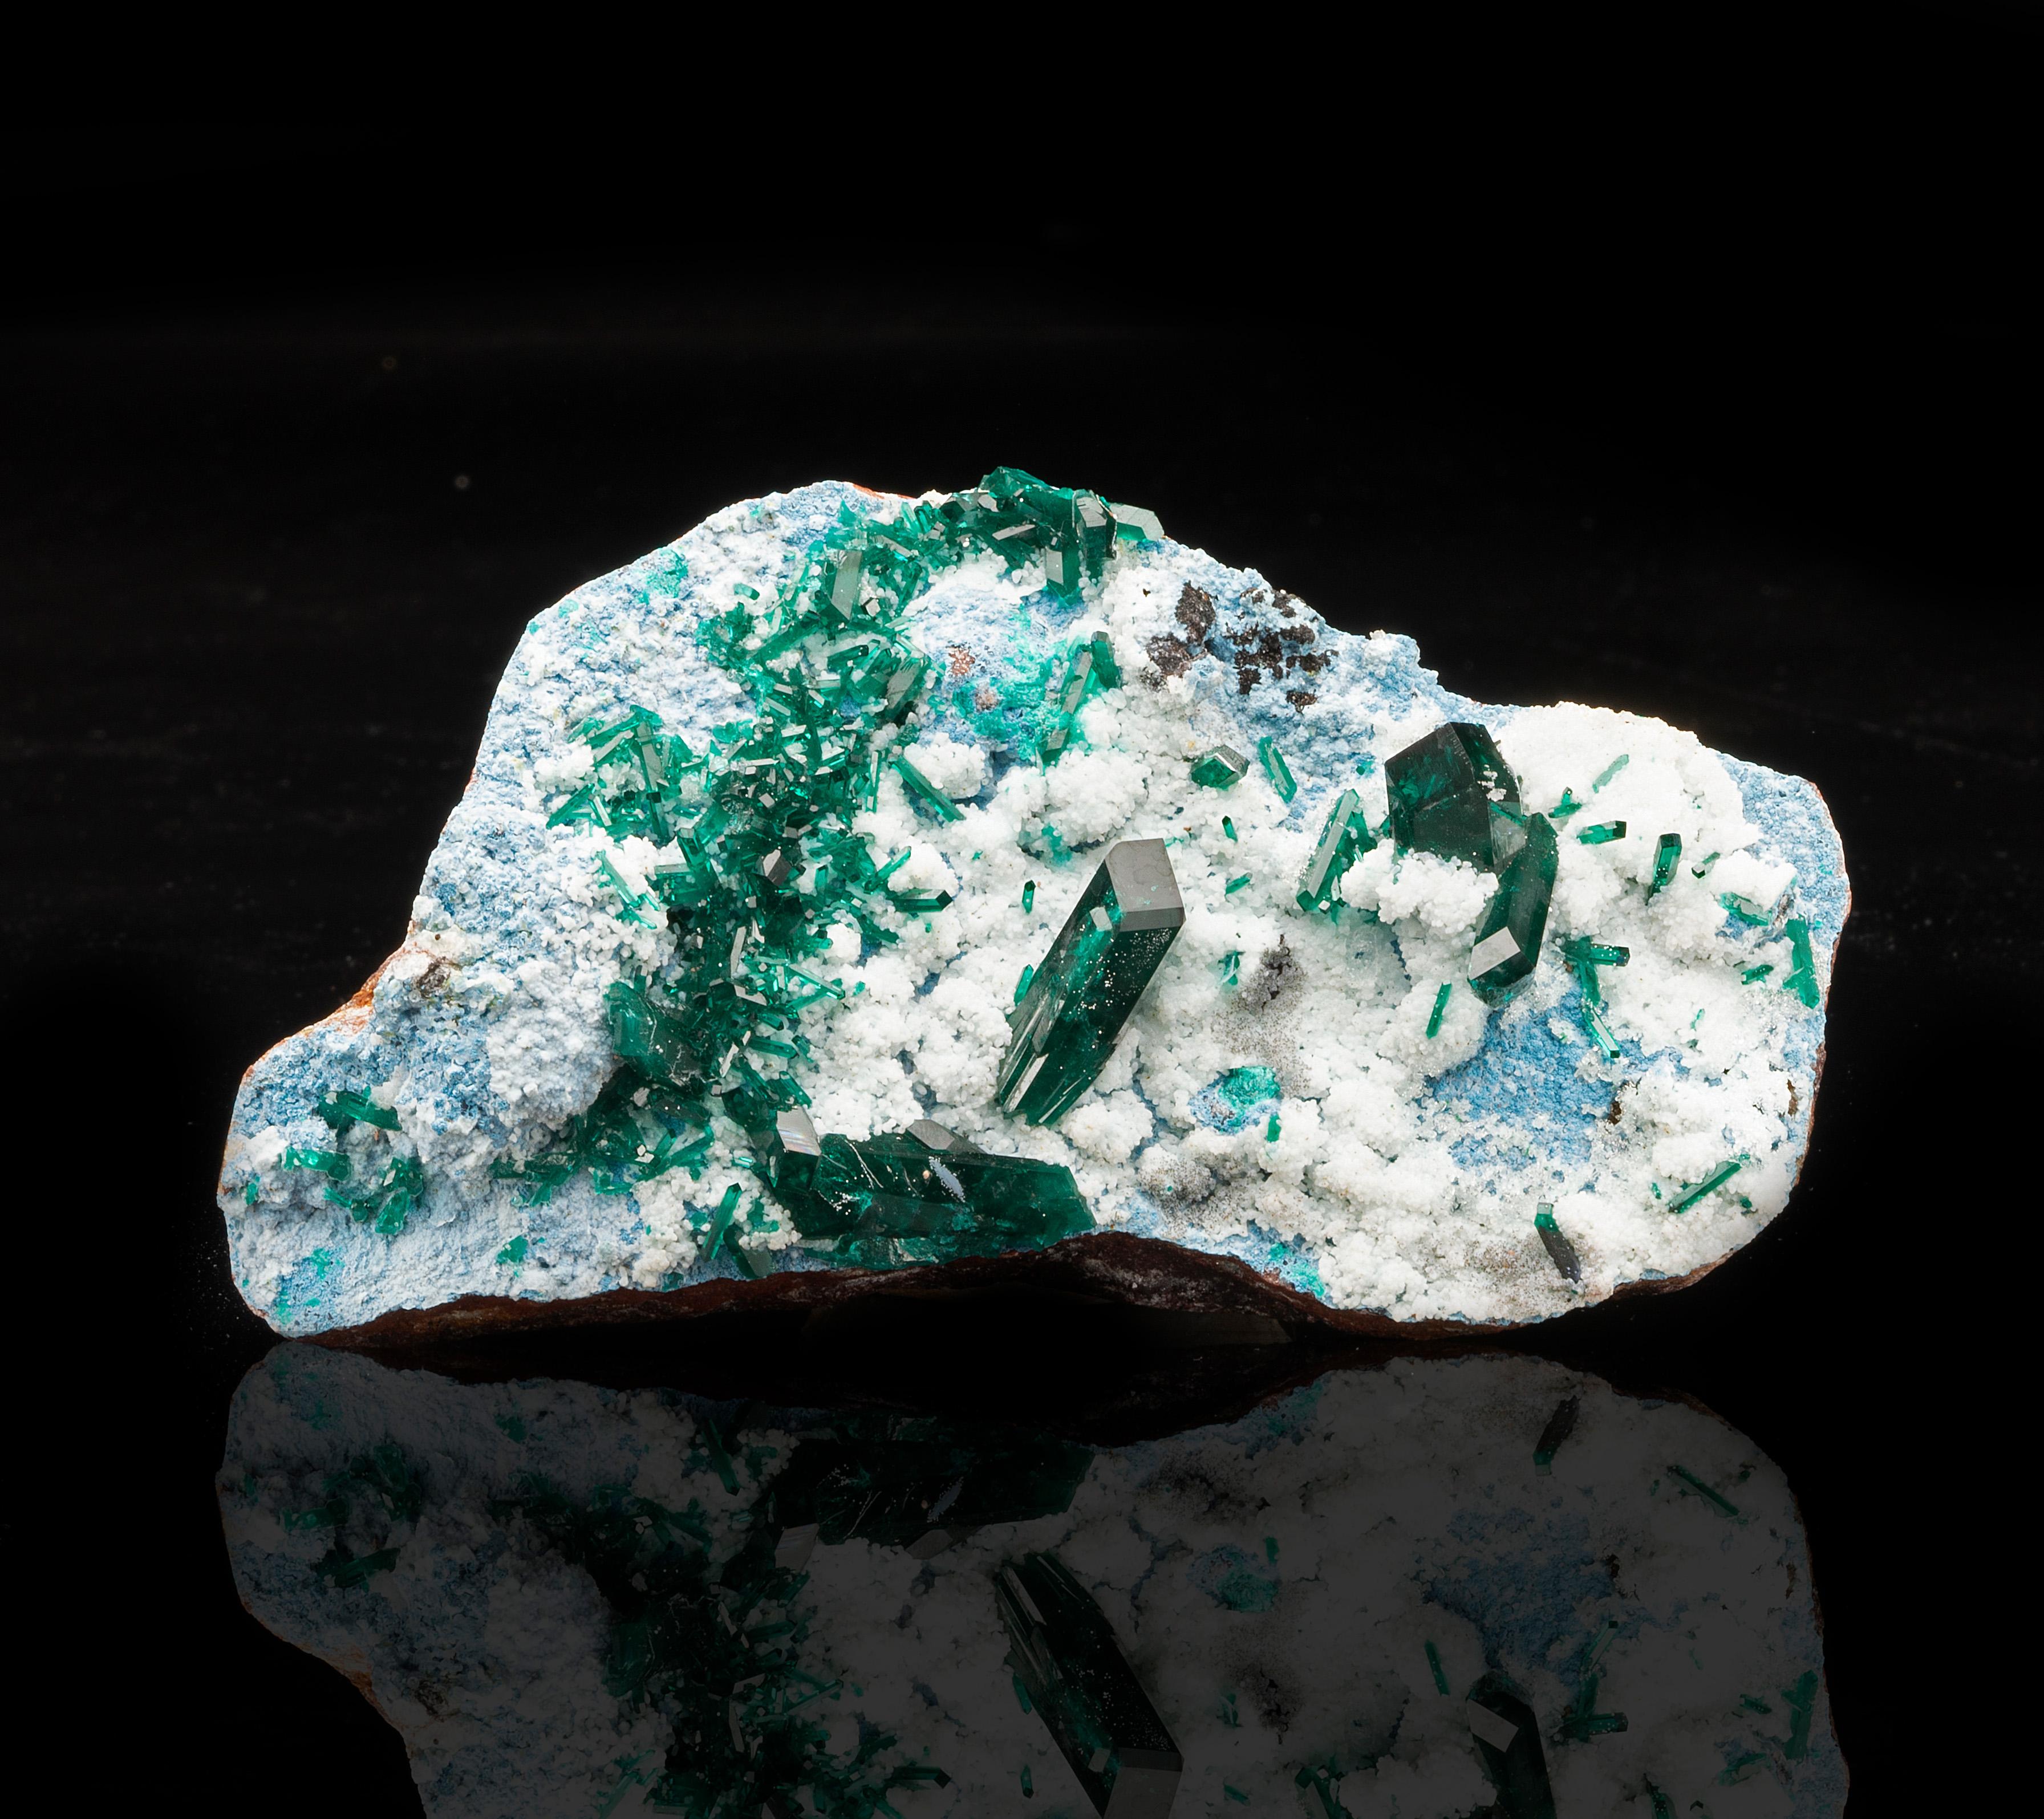 This landscape of the sky blue copper silicate mineral plancheite features generously sized, lustrous and deeply pigmented dioptase crystals emerging from mounds of sparkling, snowy calcite. The dioptase displays the mineral's characteristic clarity